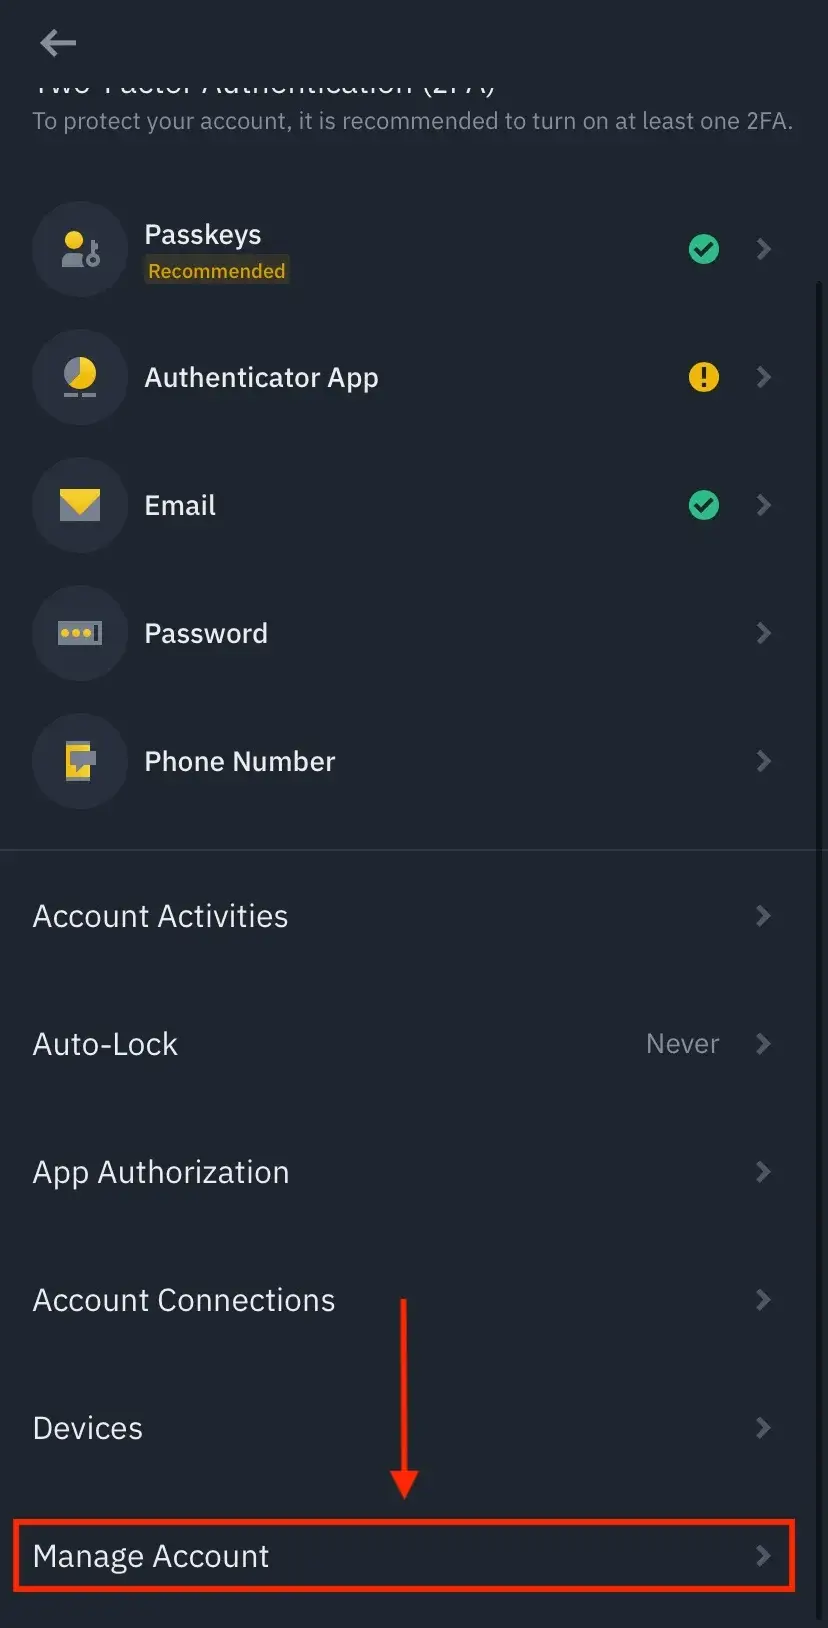 Step 5: Tap on “Manage Account”